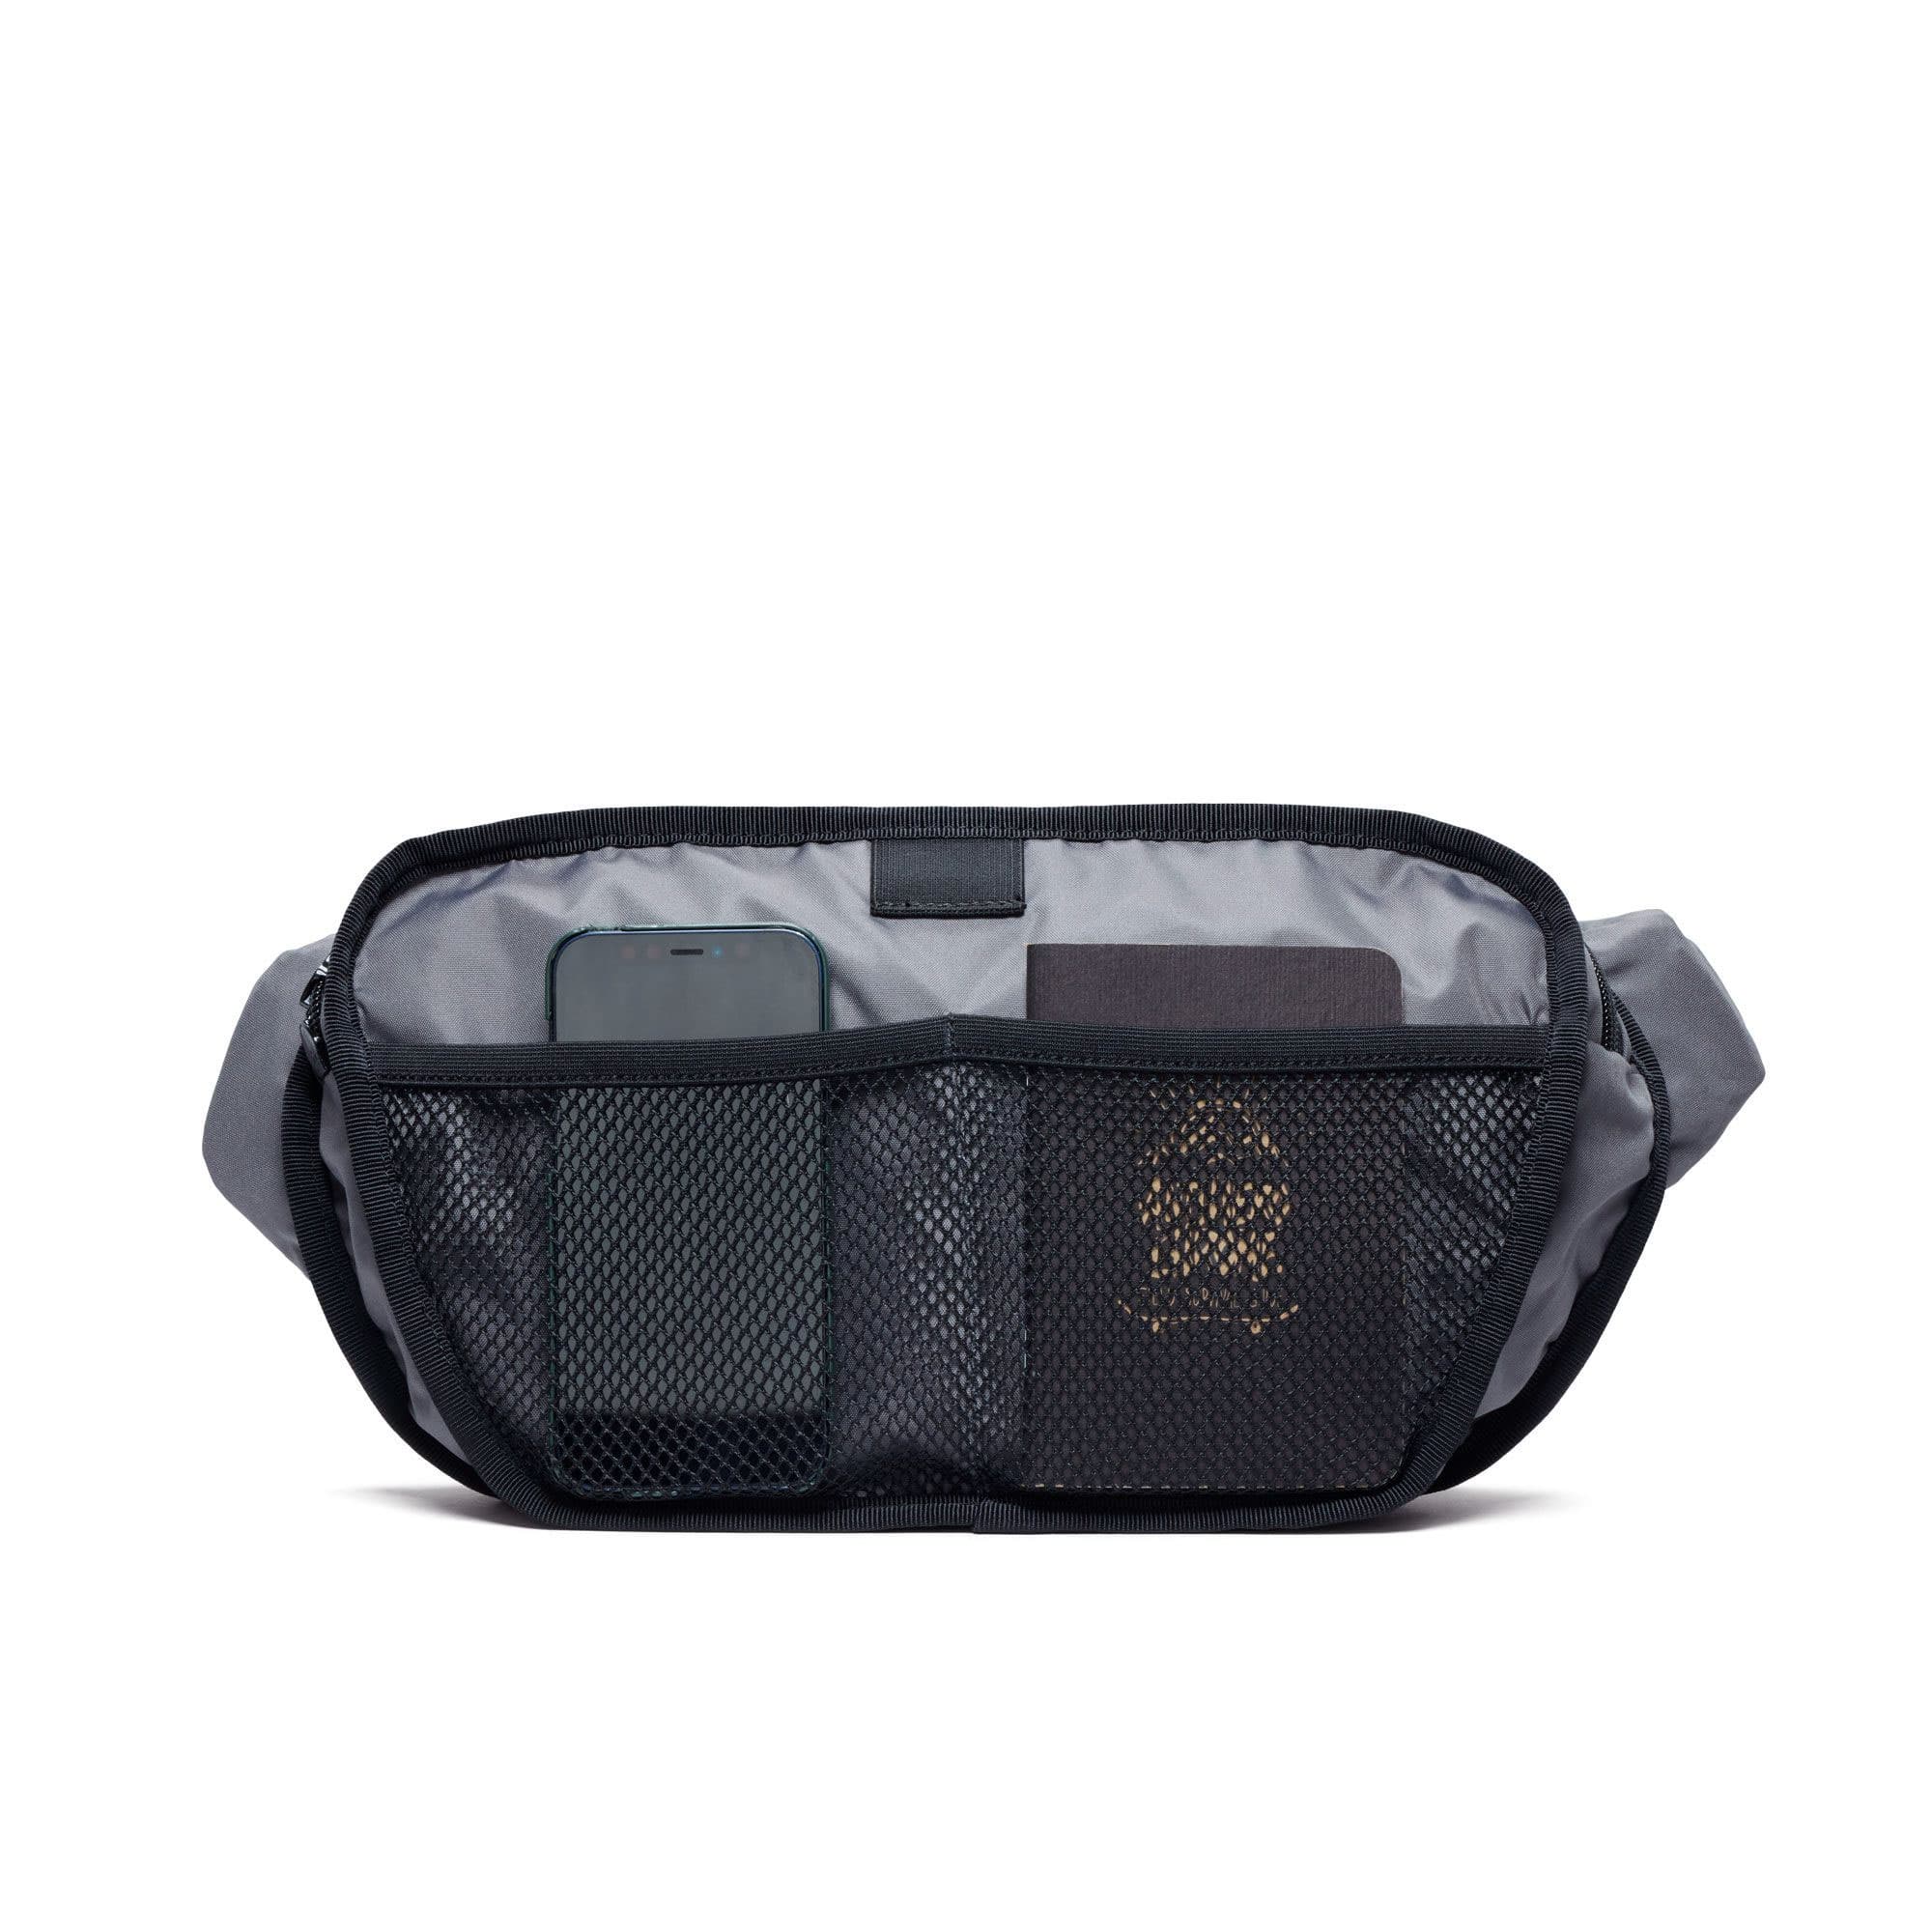 The two mesh pockets inside the Sabin 6L sling